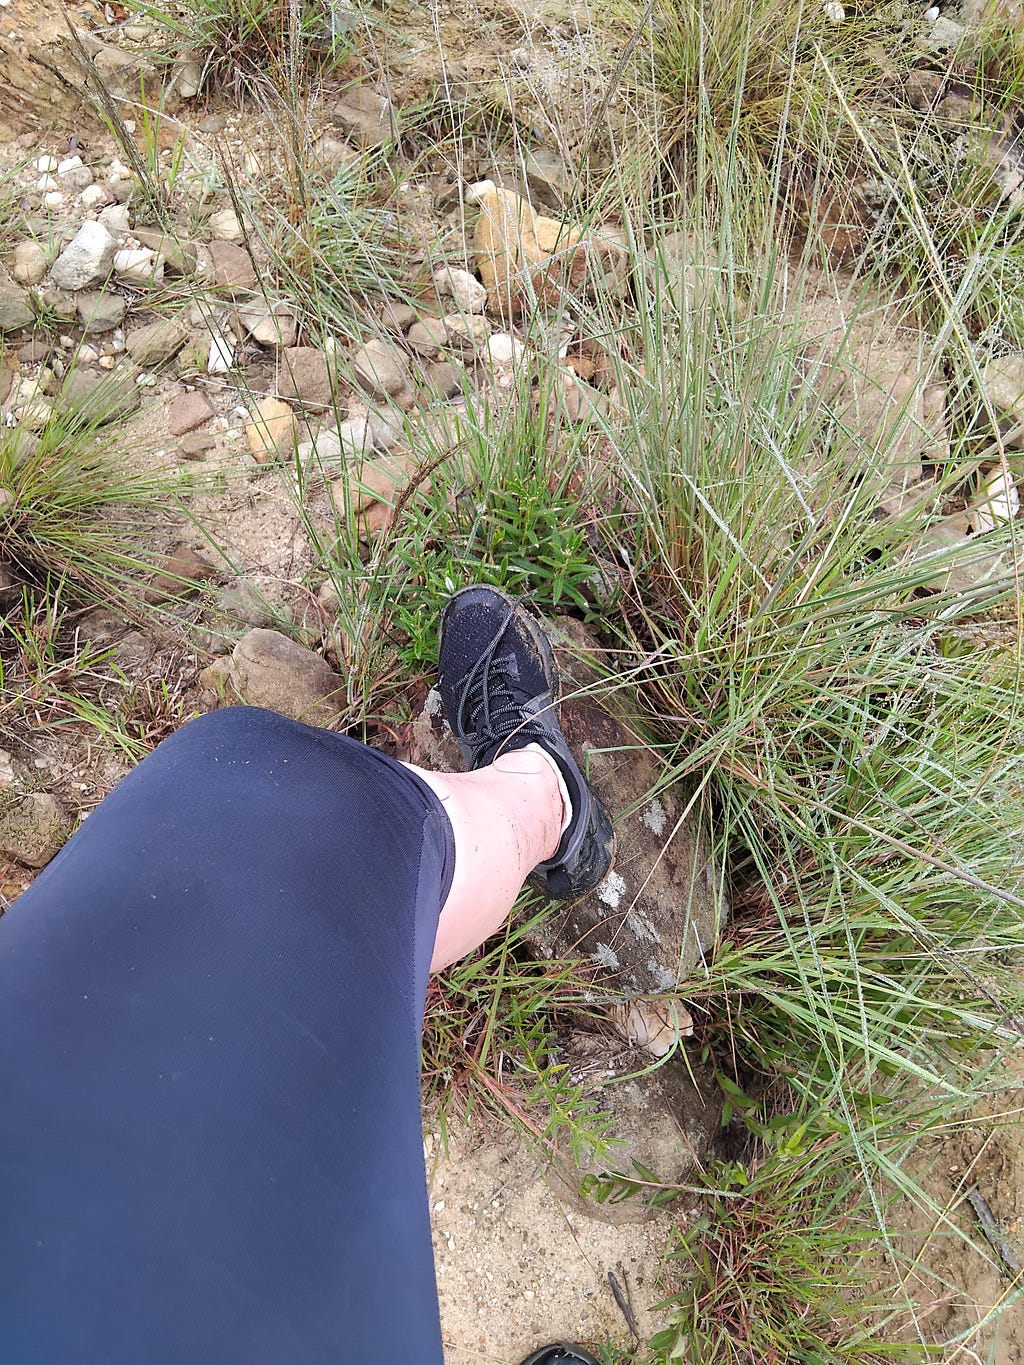 A Caucasian female leg wearing blue yoga pants and black shoes, resting on a rock, during a grueling hike in nature